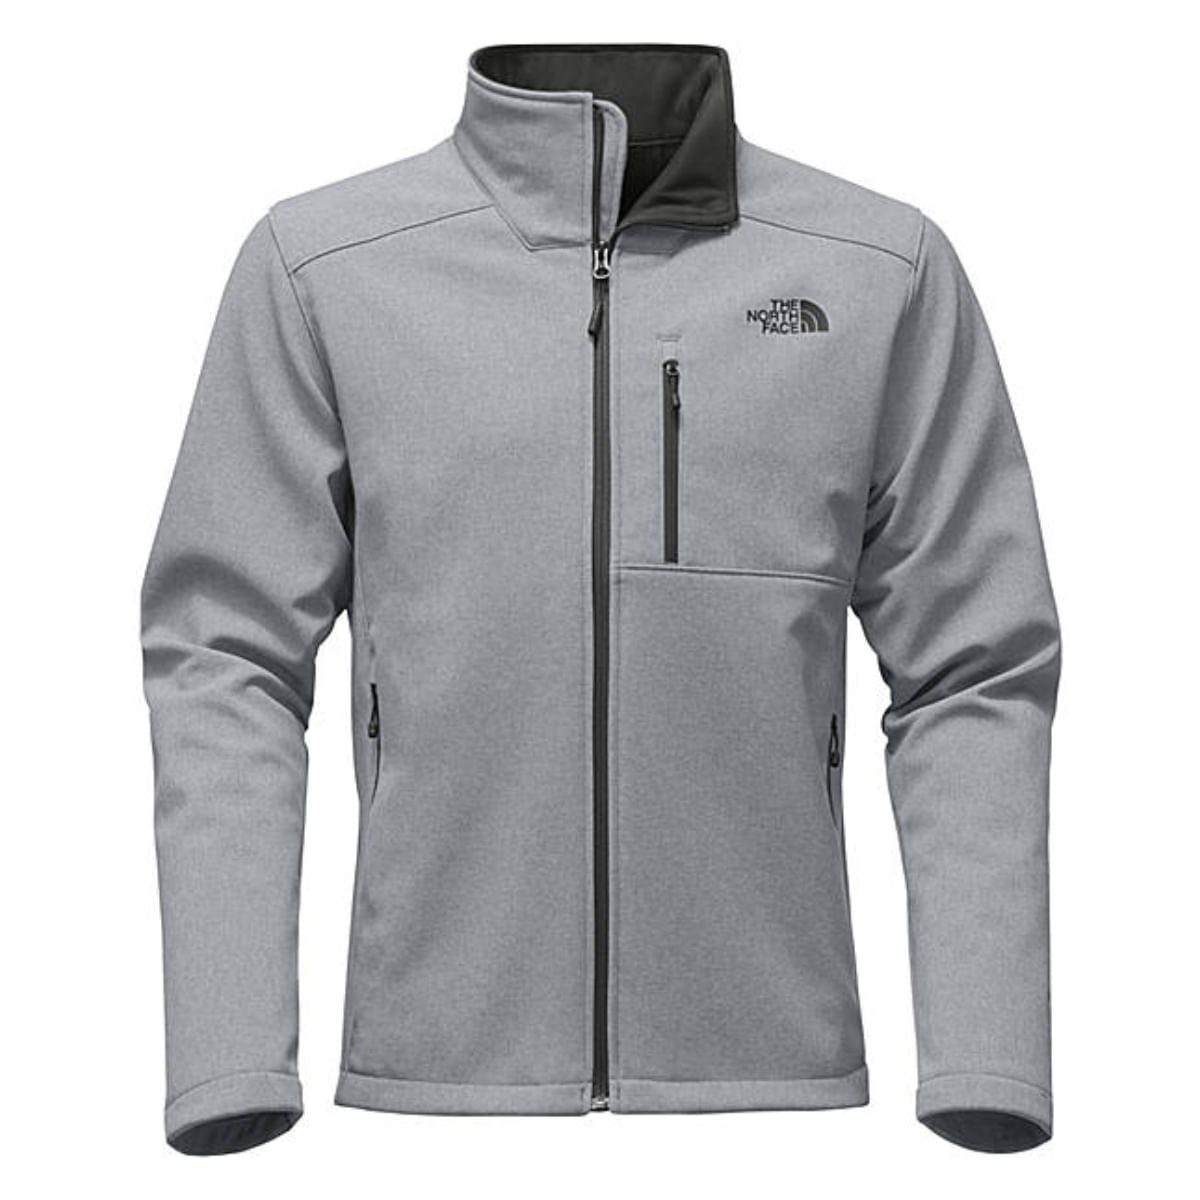 the north face men's apex bionic tnf 2 soft shell jacket